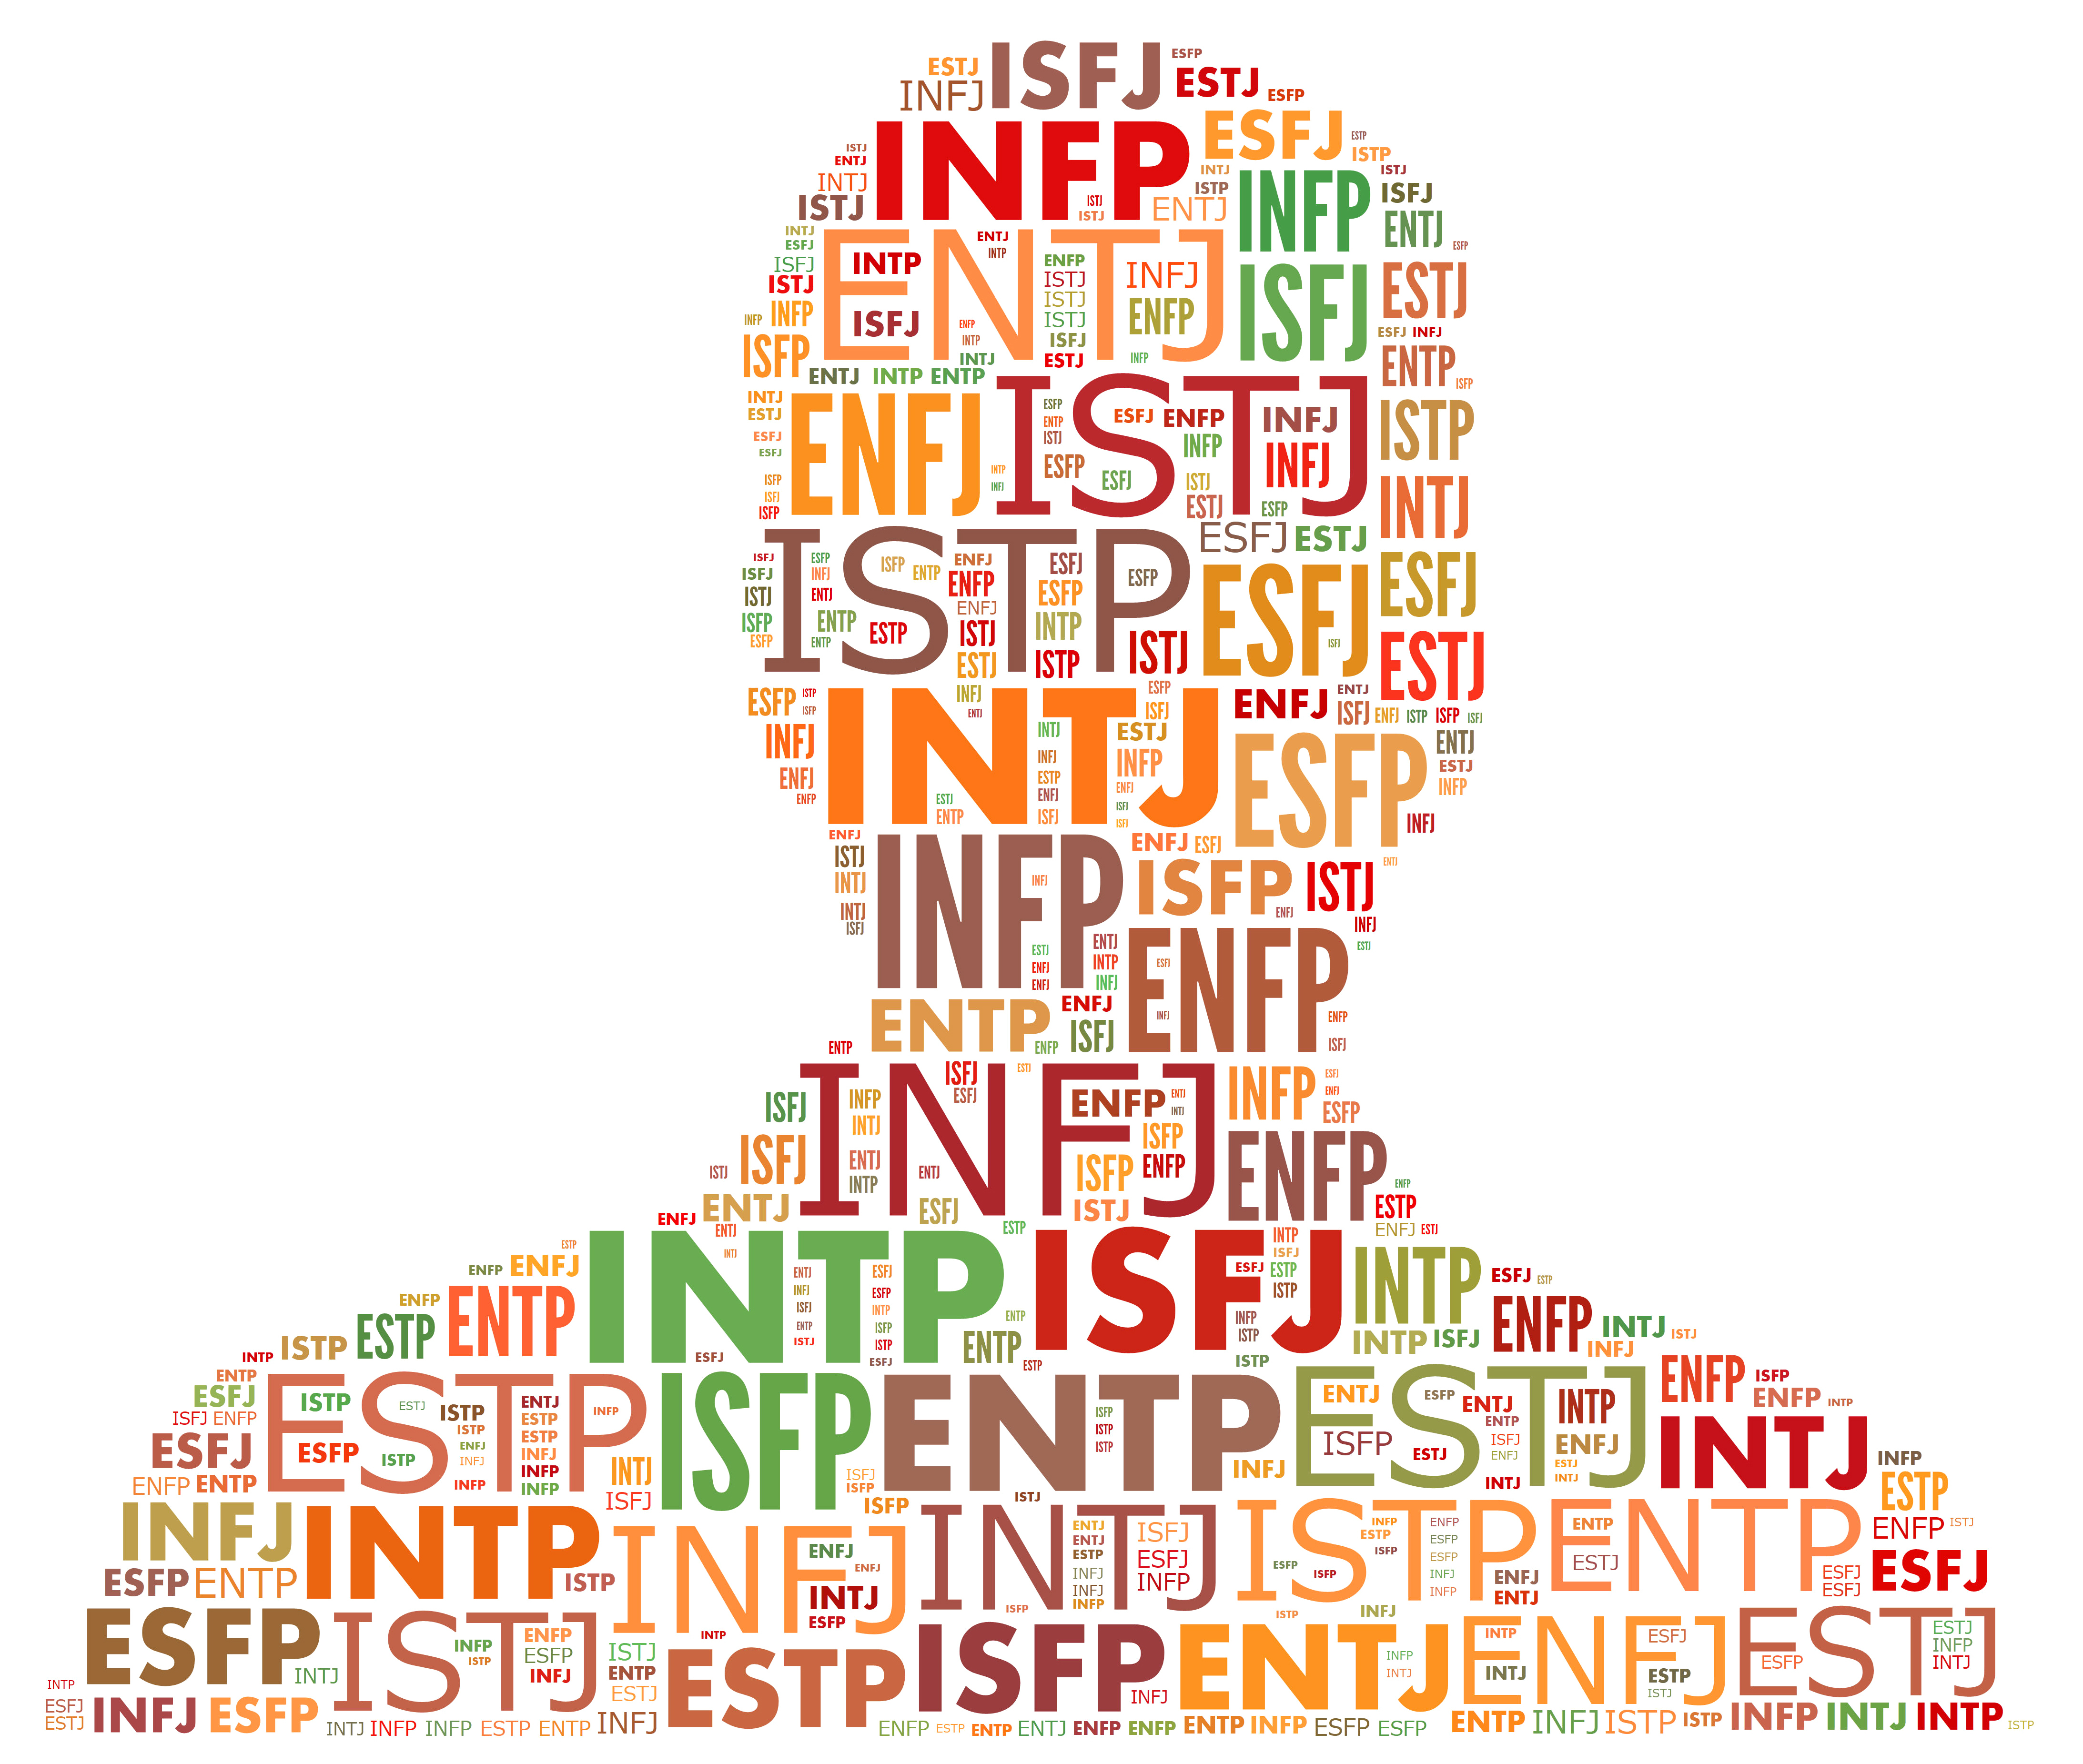 Myers Briggs personality assessment graphic